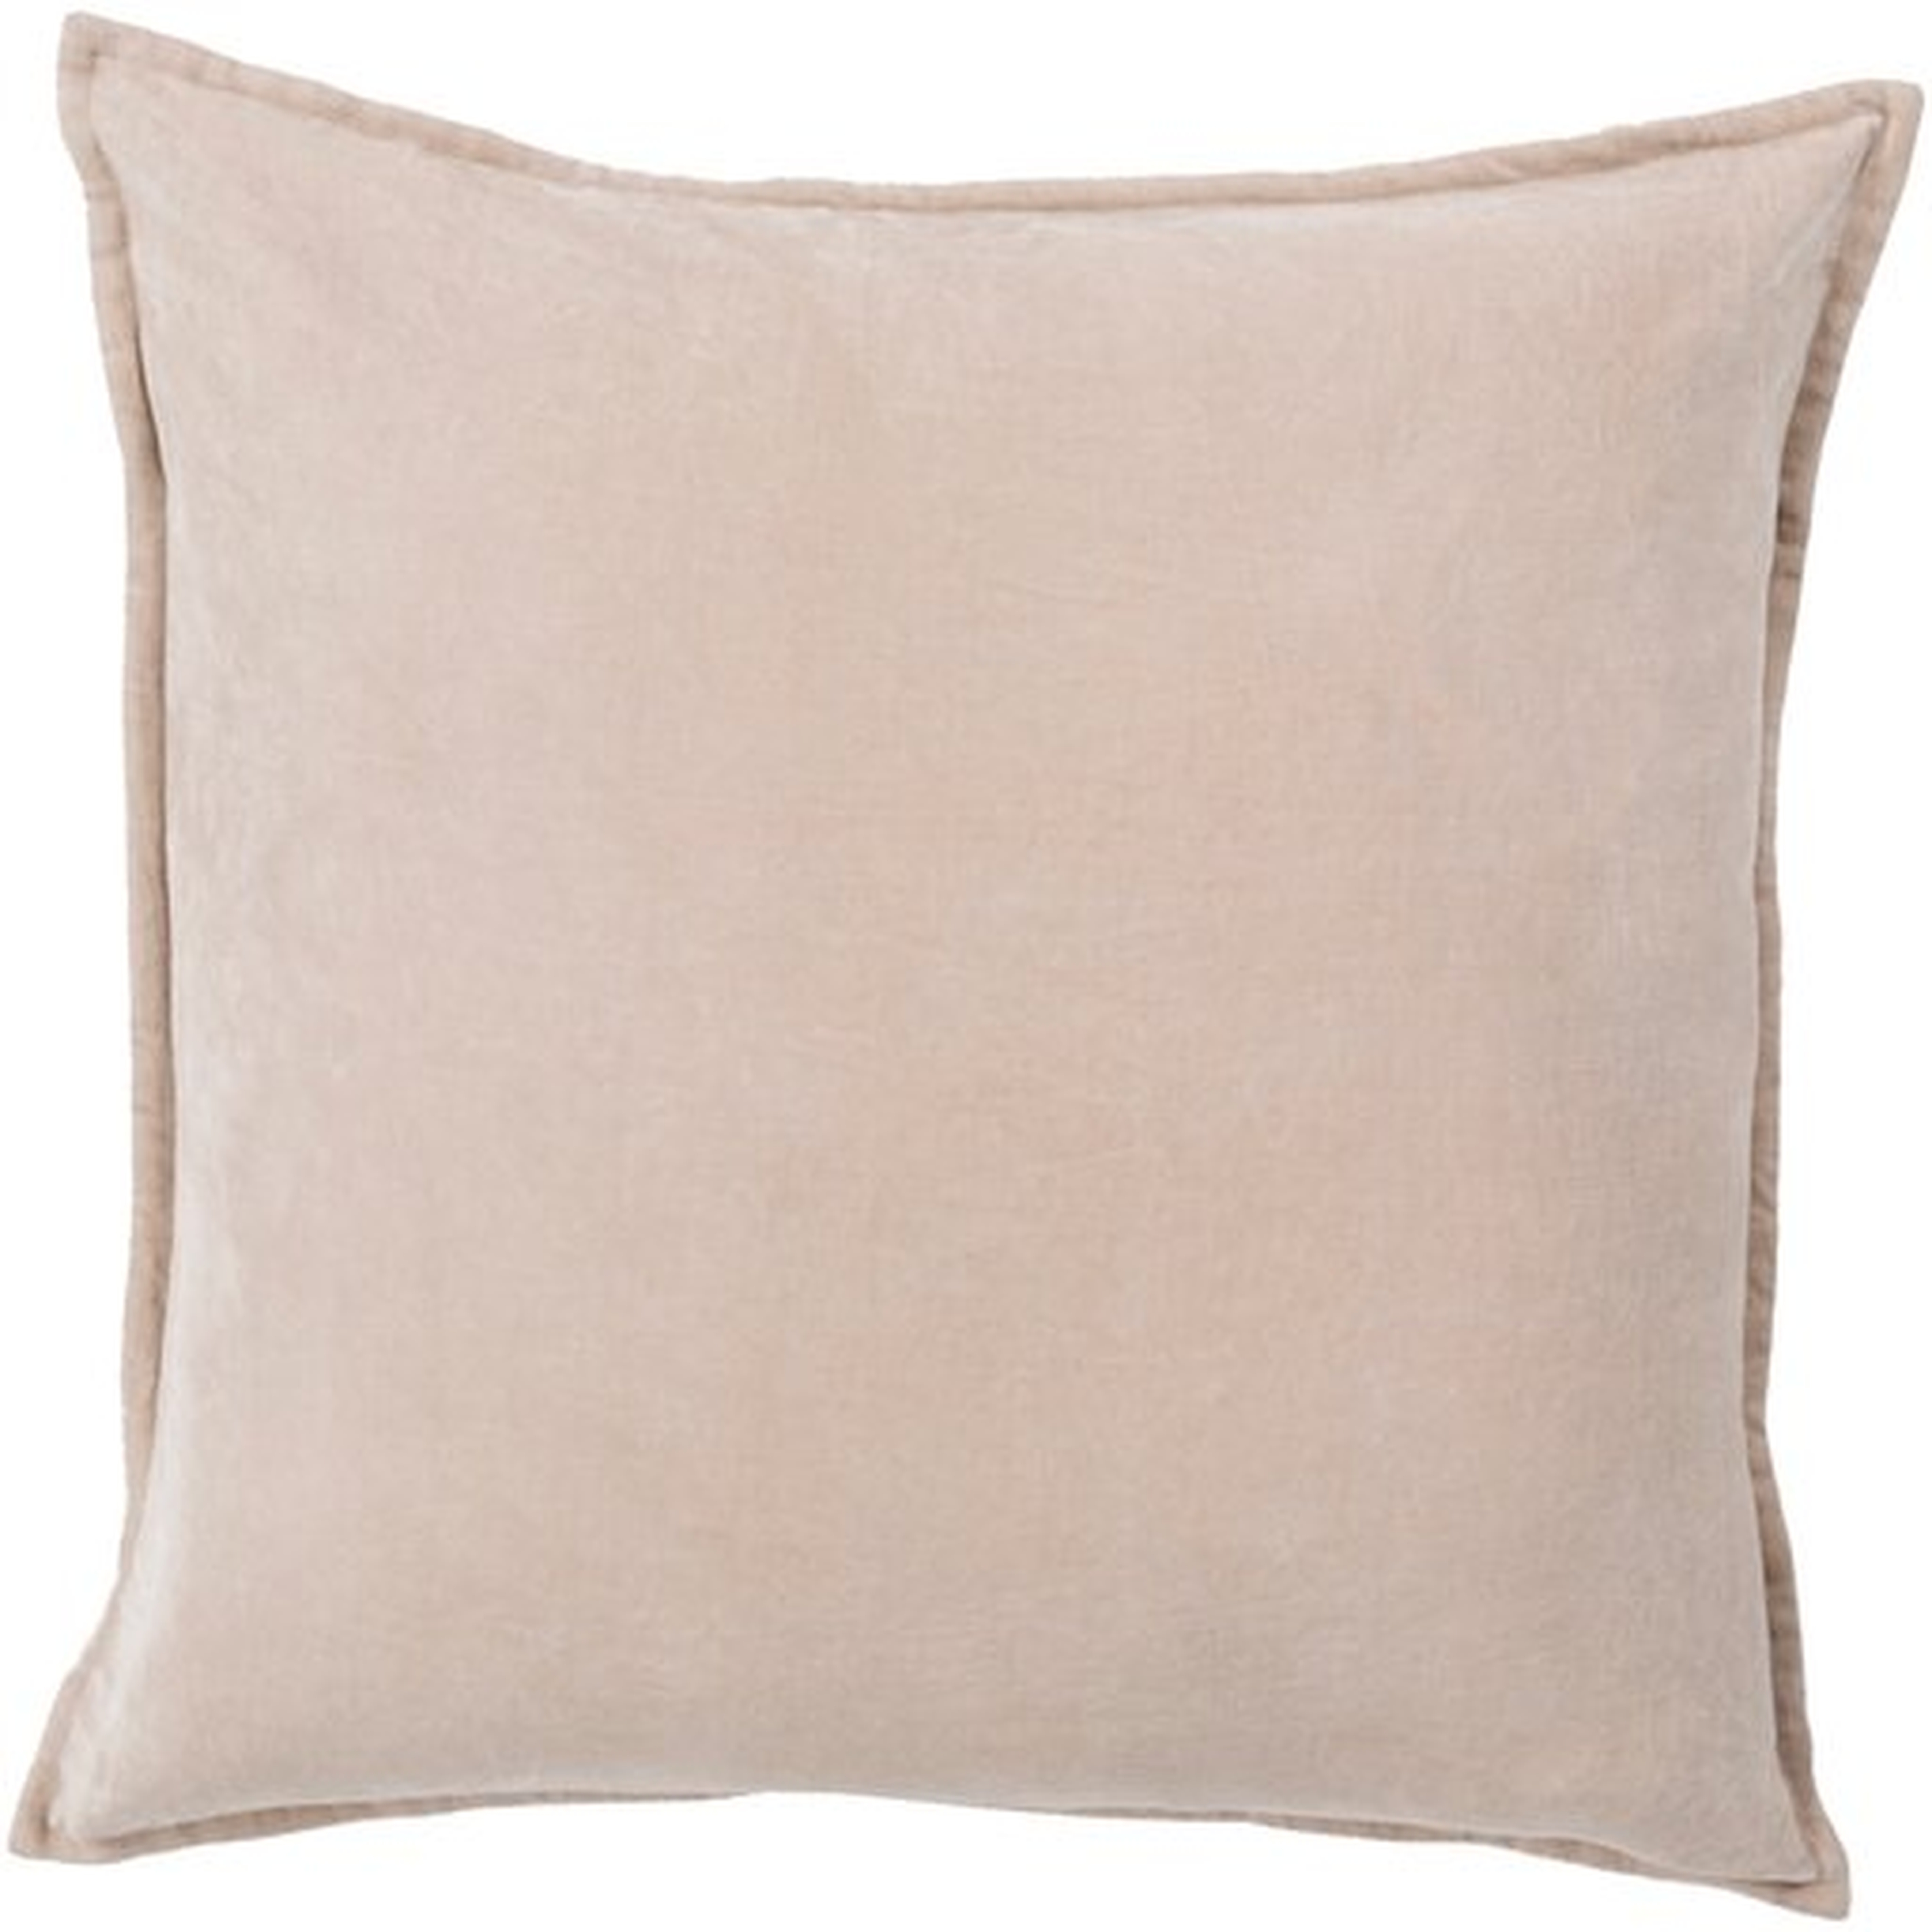 20" x 20" Gabrielle Pillow Taupe with down insert - Studio Marcette